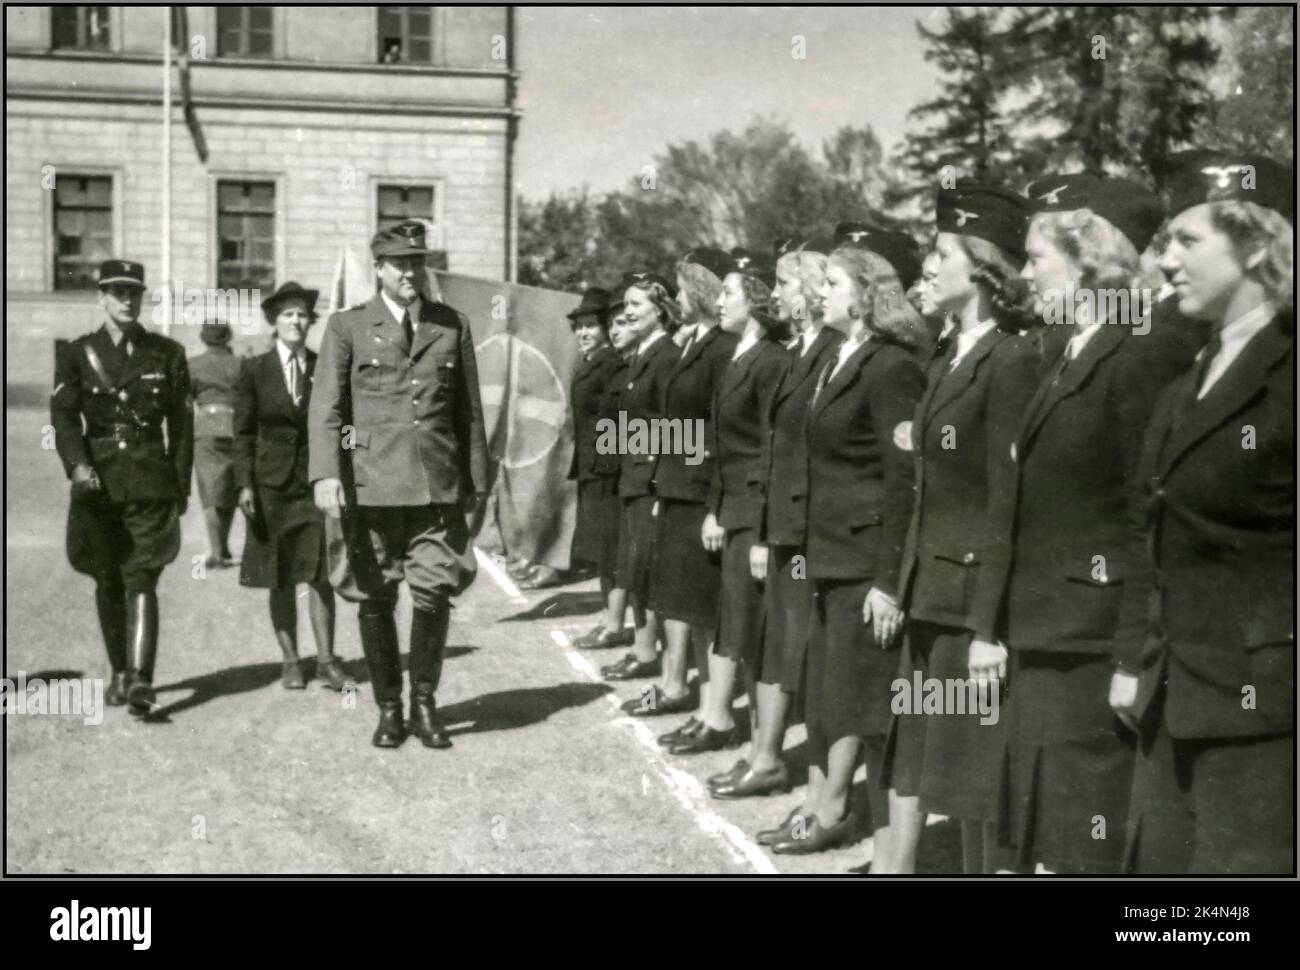 QUISLINGS NORWAY Vidkun Quisling inspects NS women in uniform  at Slottsplasse Oslo Norway18 May 1943: 'The roll call at Castle Square yesterday. The Prime Minister thanks his comrades in arms for 10 years of effort. Norwegian National Socialists (Quislings) in collaboration with Nazi Party of Germany WW2 Stock Photo